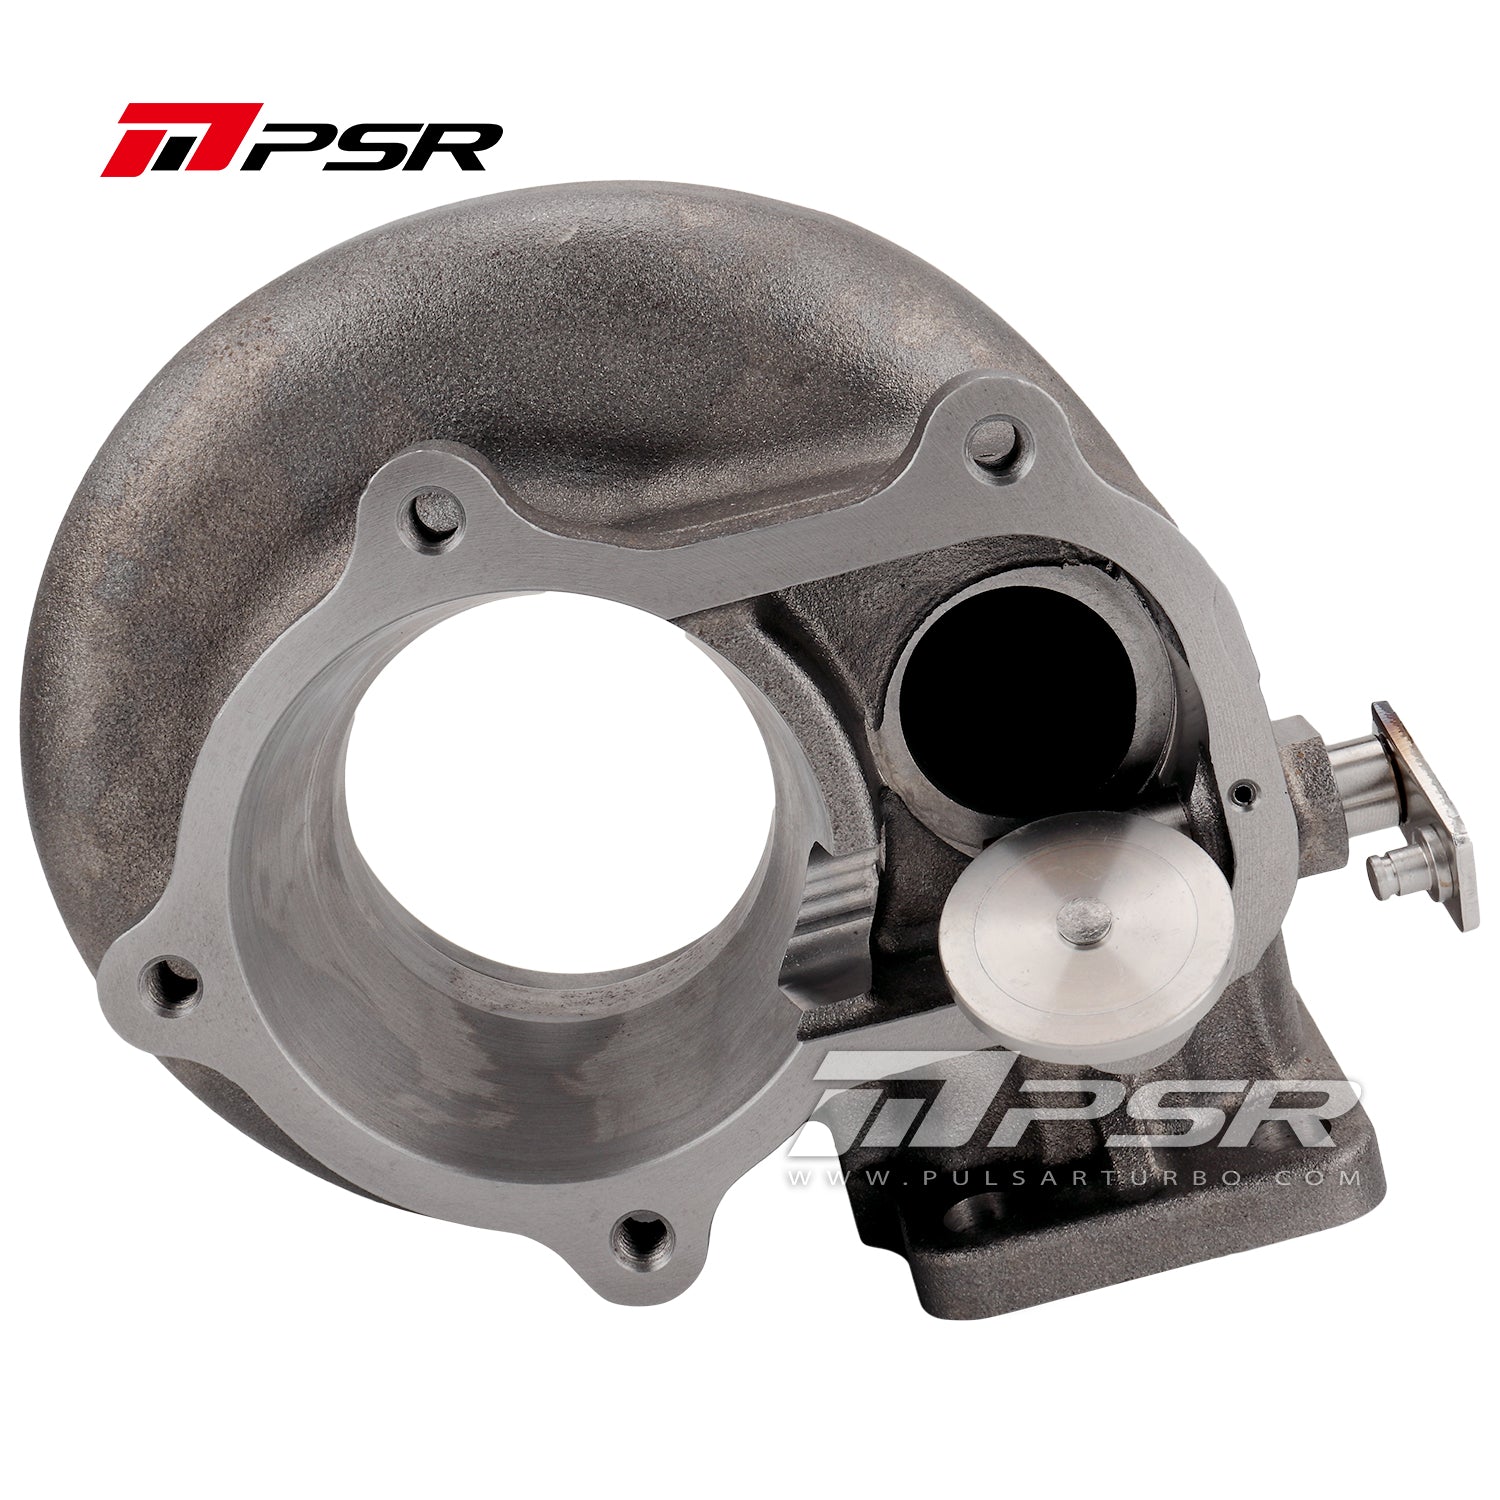 PSR PULSAR Next GEN 6782 for Ford Falcon to replace the factory GT3582R turbo